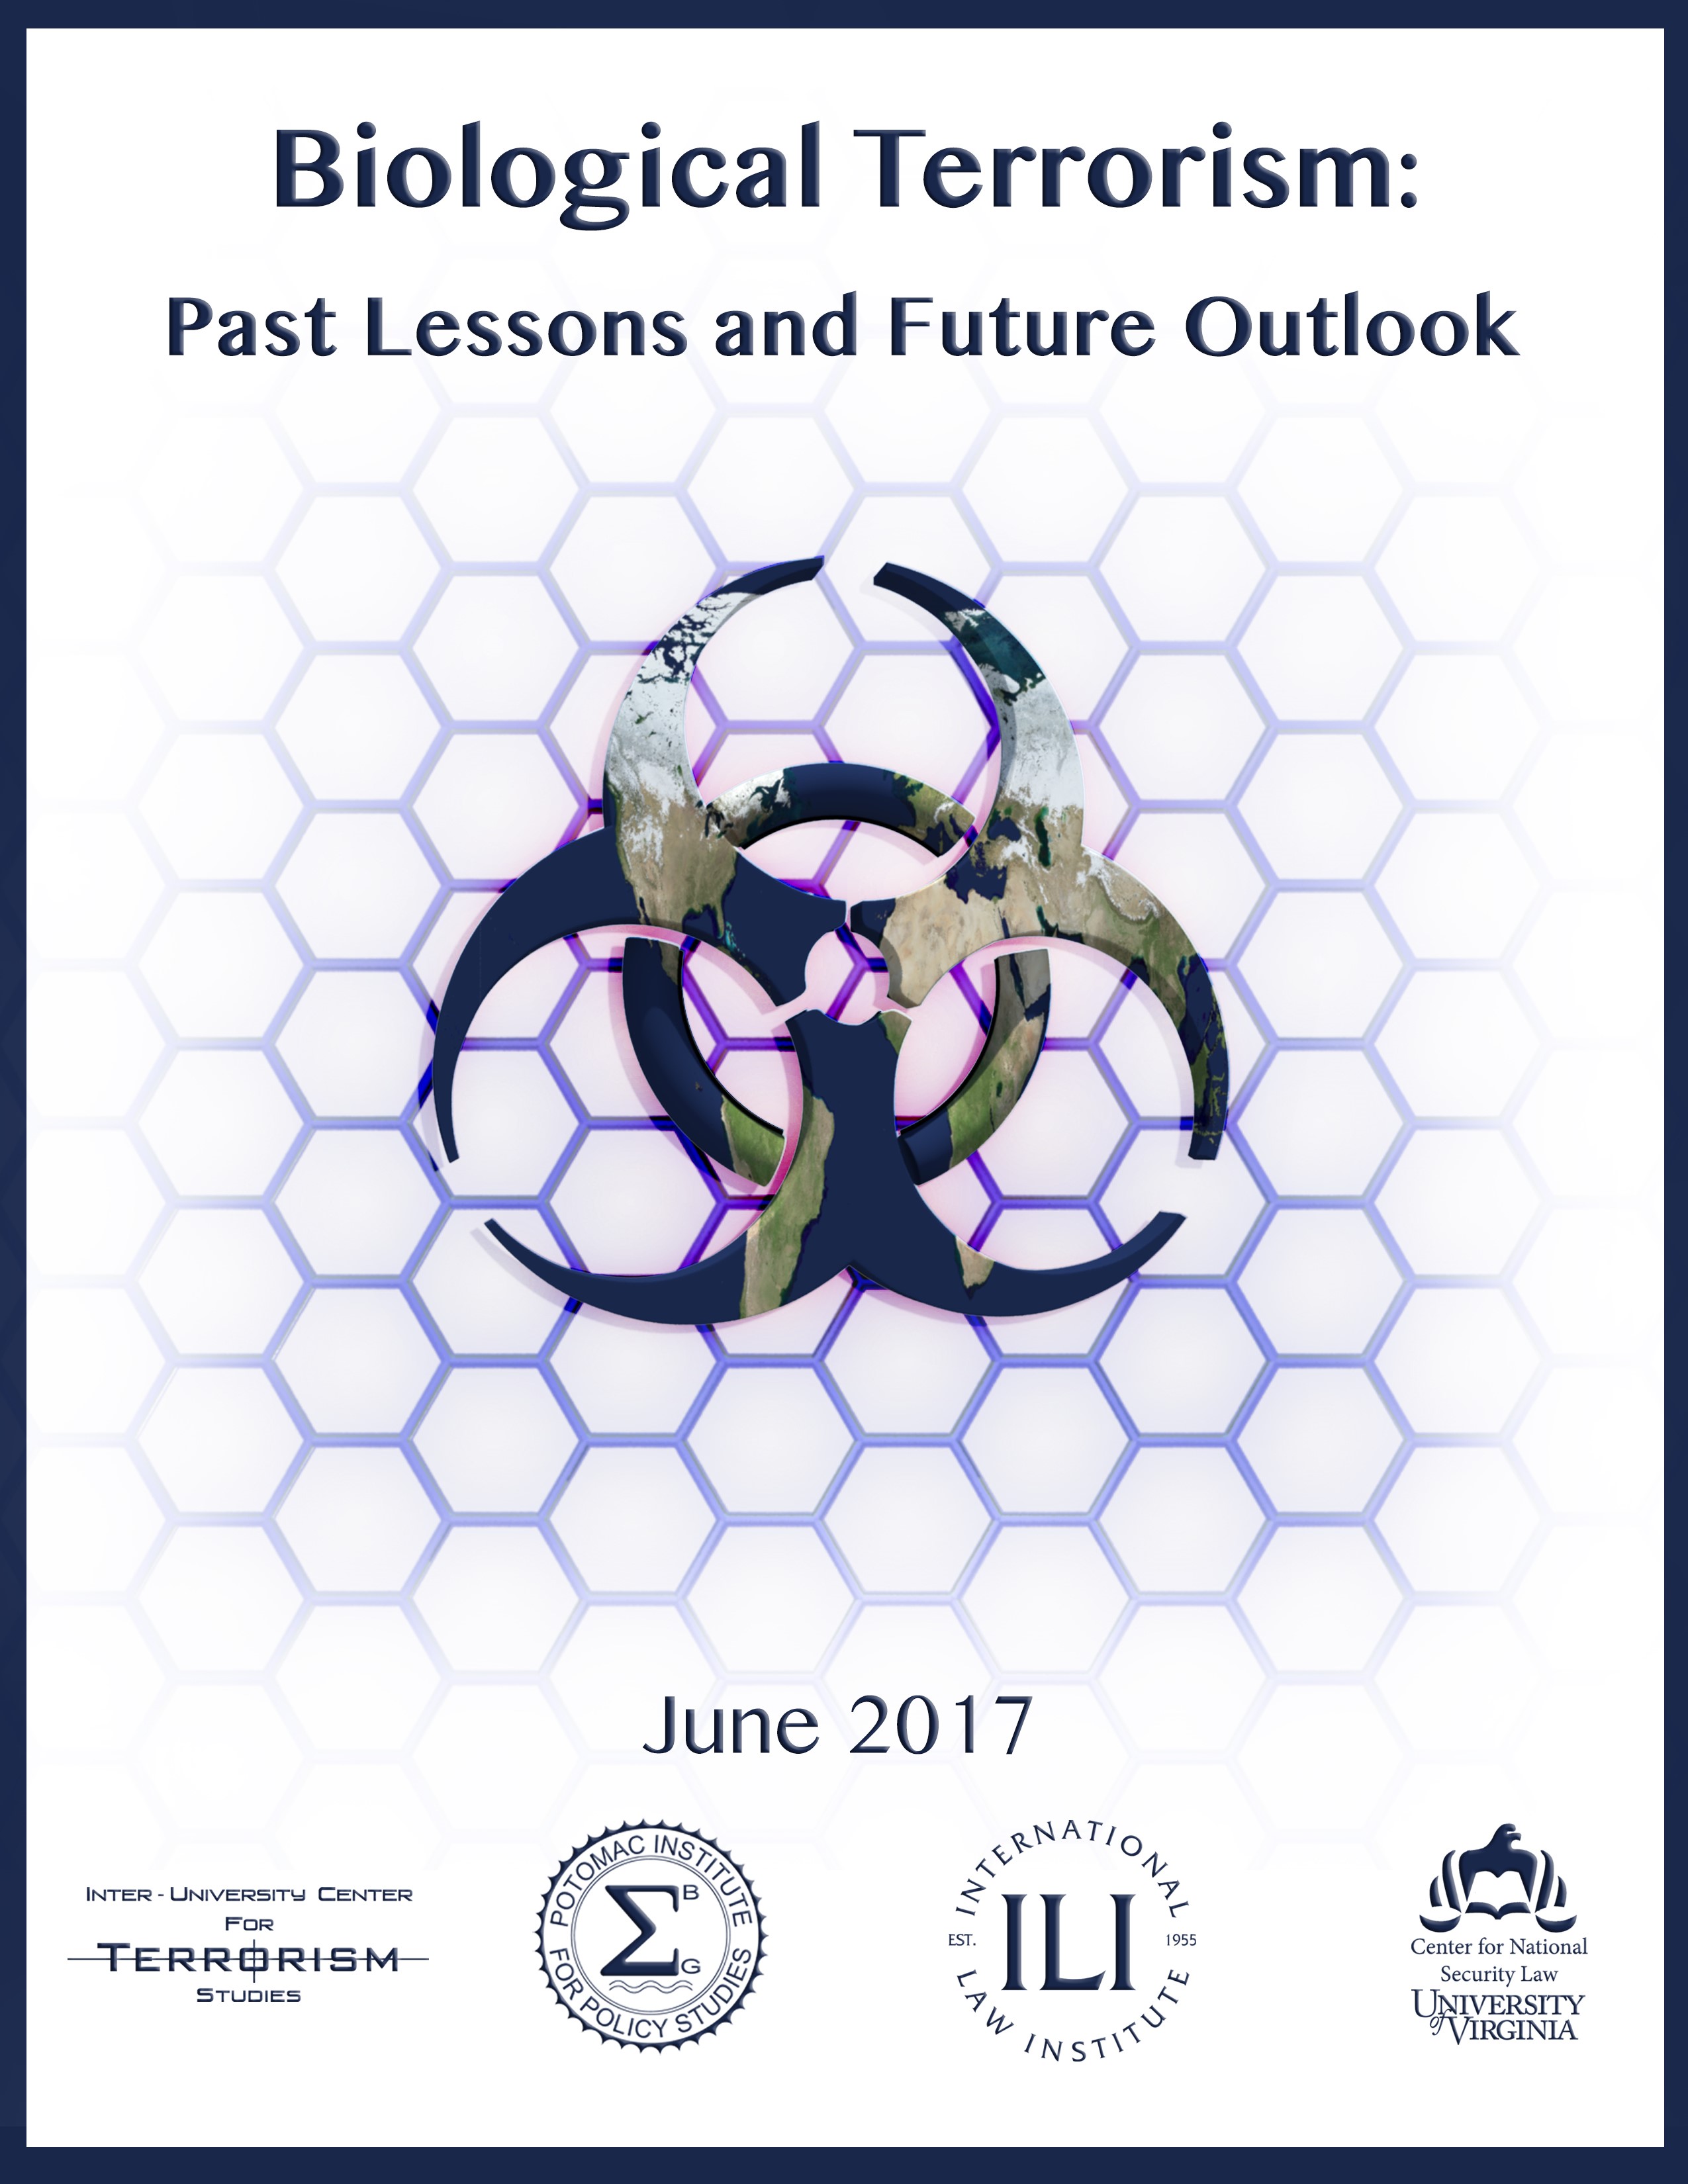 Biological Terrorism: Past Lessons and Future Outlook